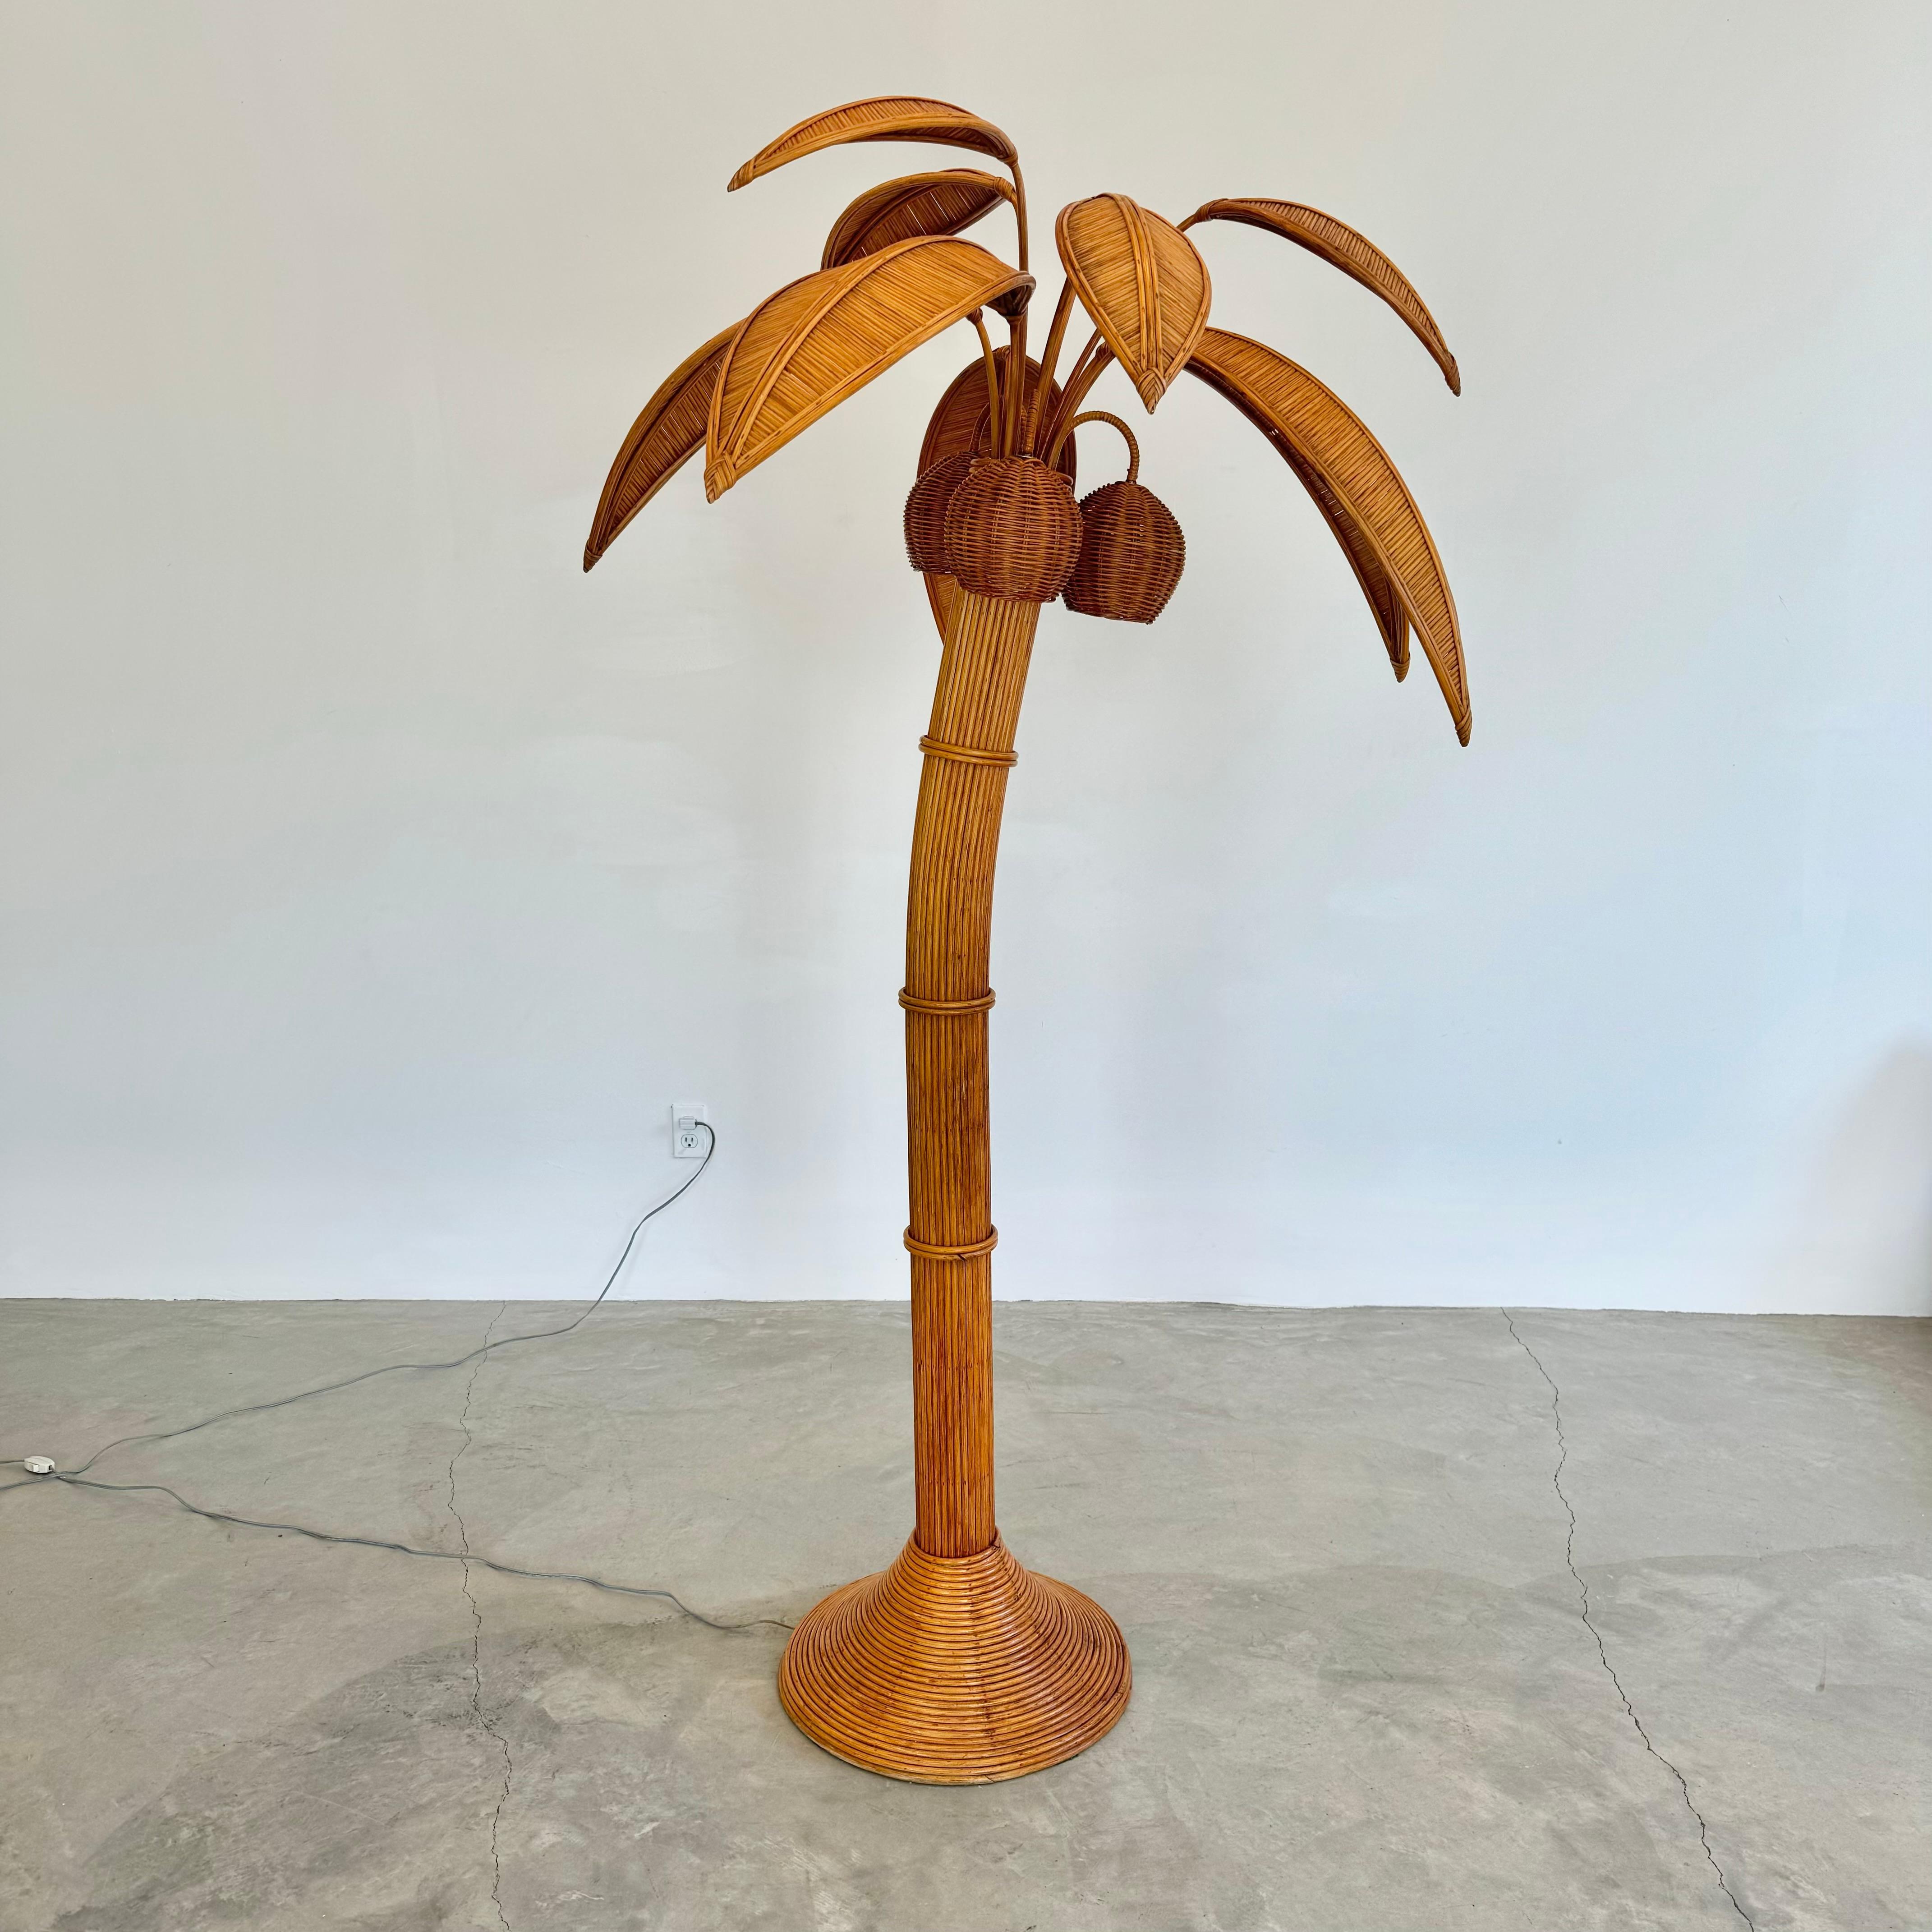 Beachy floor lamp of a Palm tree. Just under 7 feet tall. Made of rattan and wicker. Three wicker coconuts each contain a socket/light inside. Coconuts swivel. Natural color palm leaves made of wicker and rattan sprout out from the top. 5 large